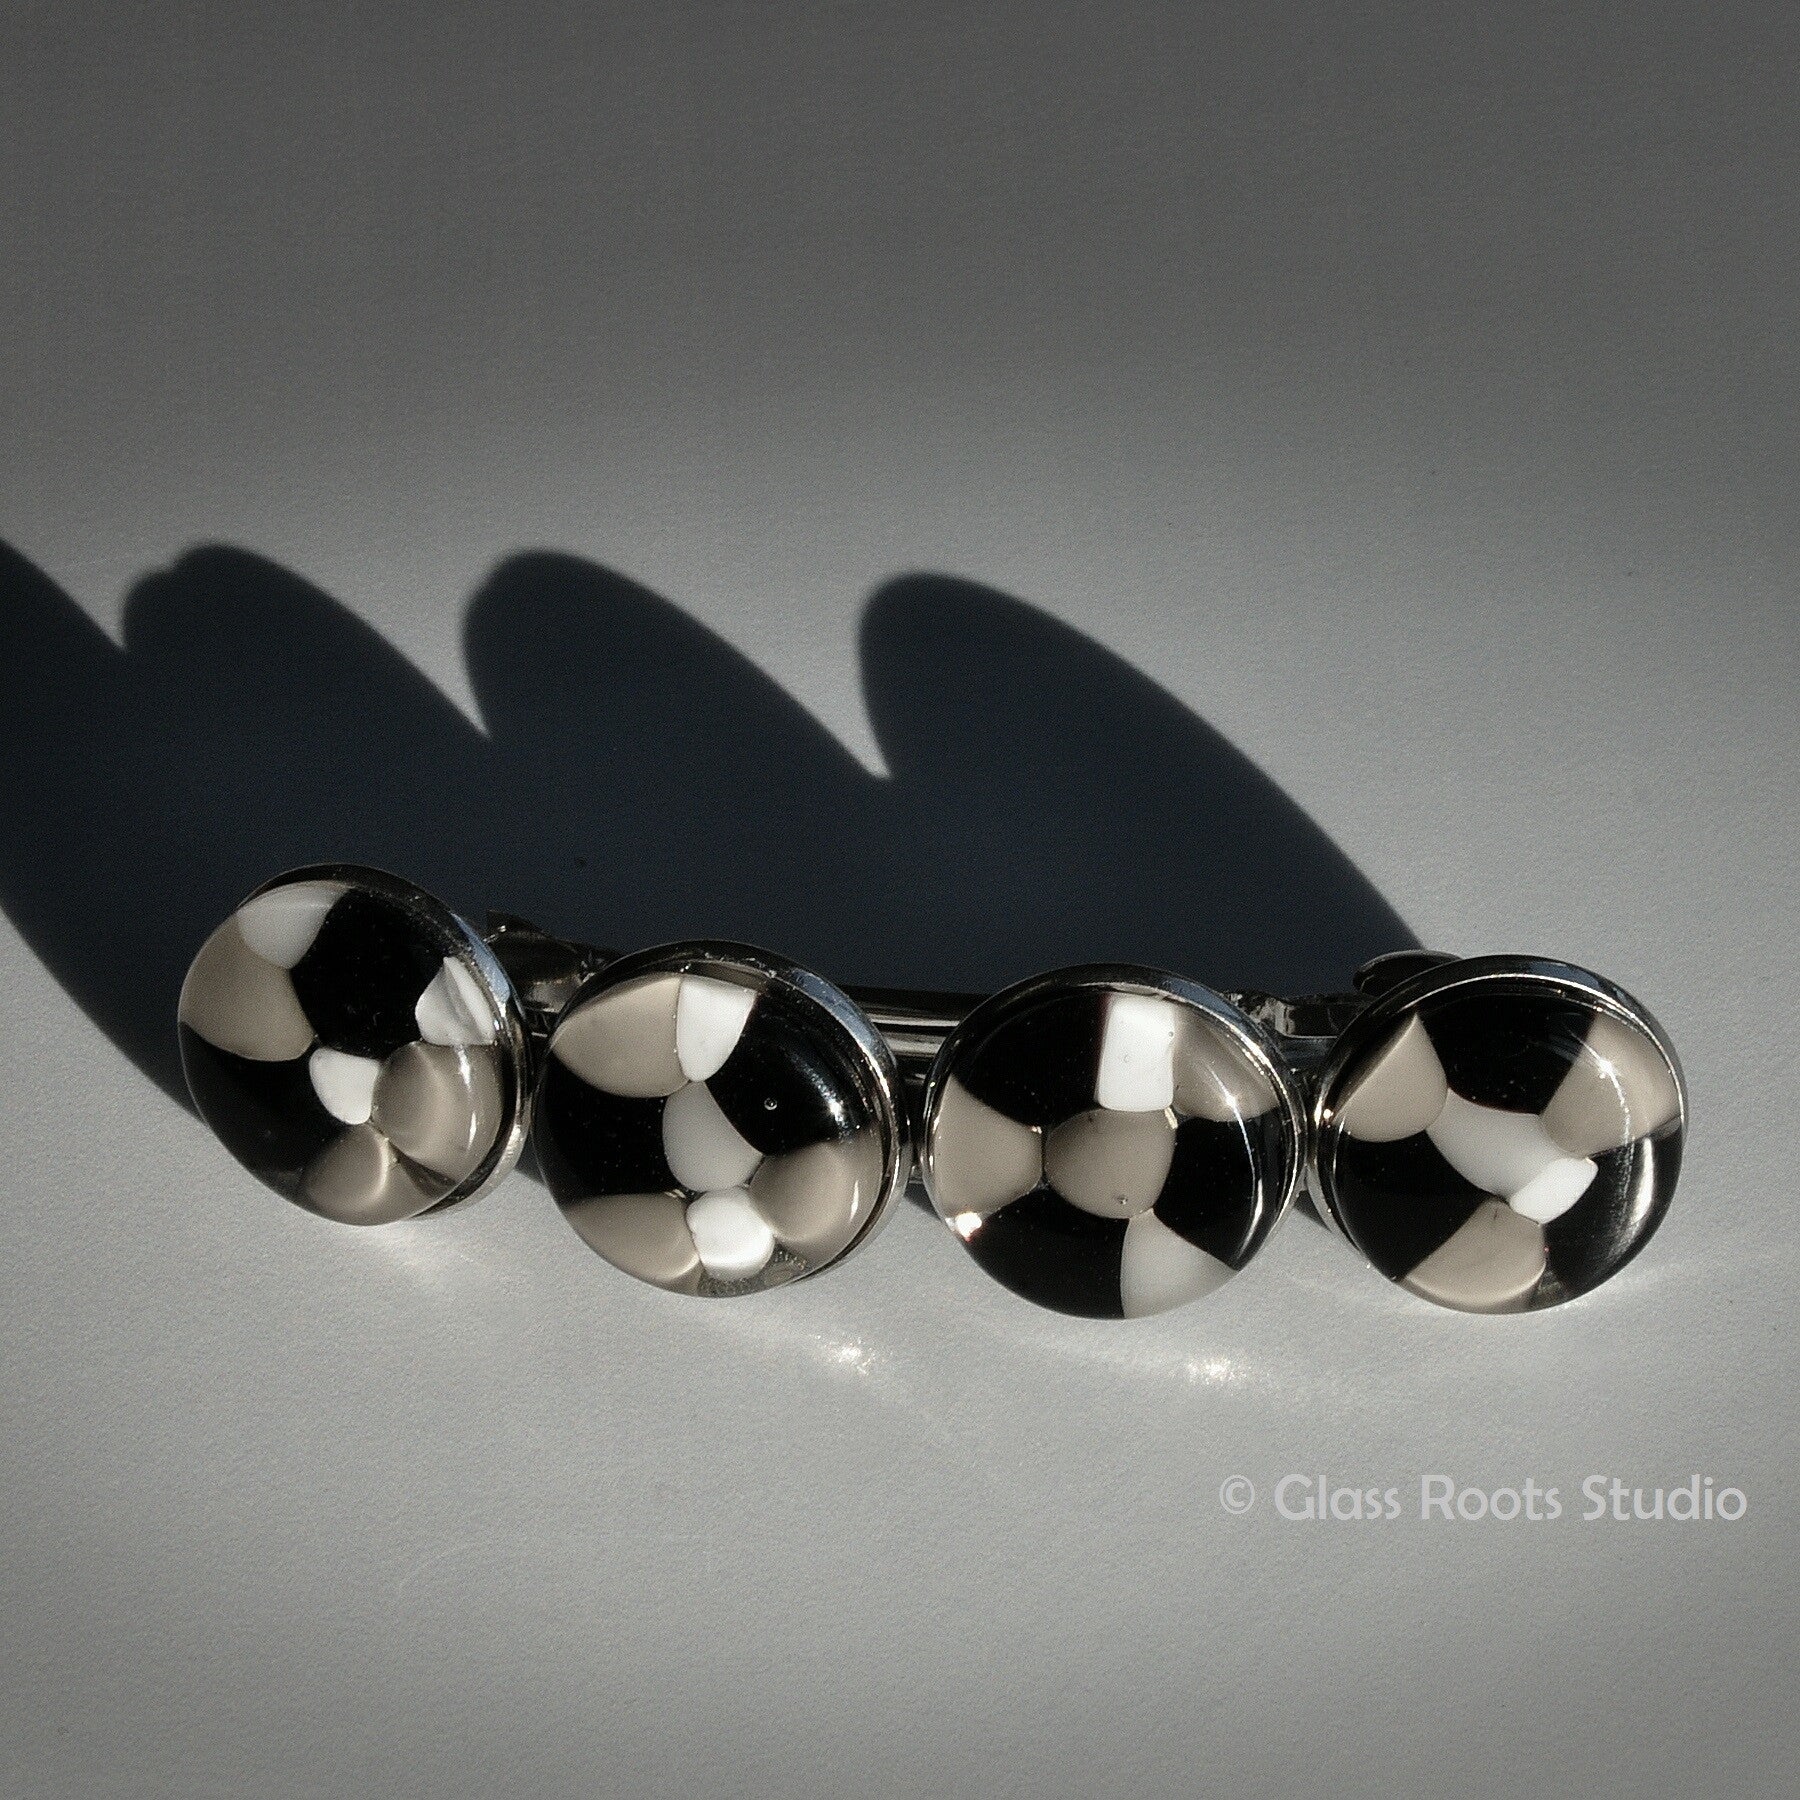 Glass Barrette Hairclip - Black, White and Grey